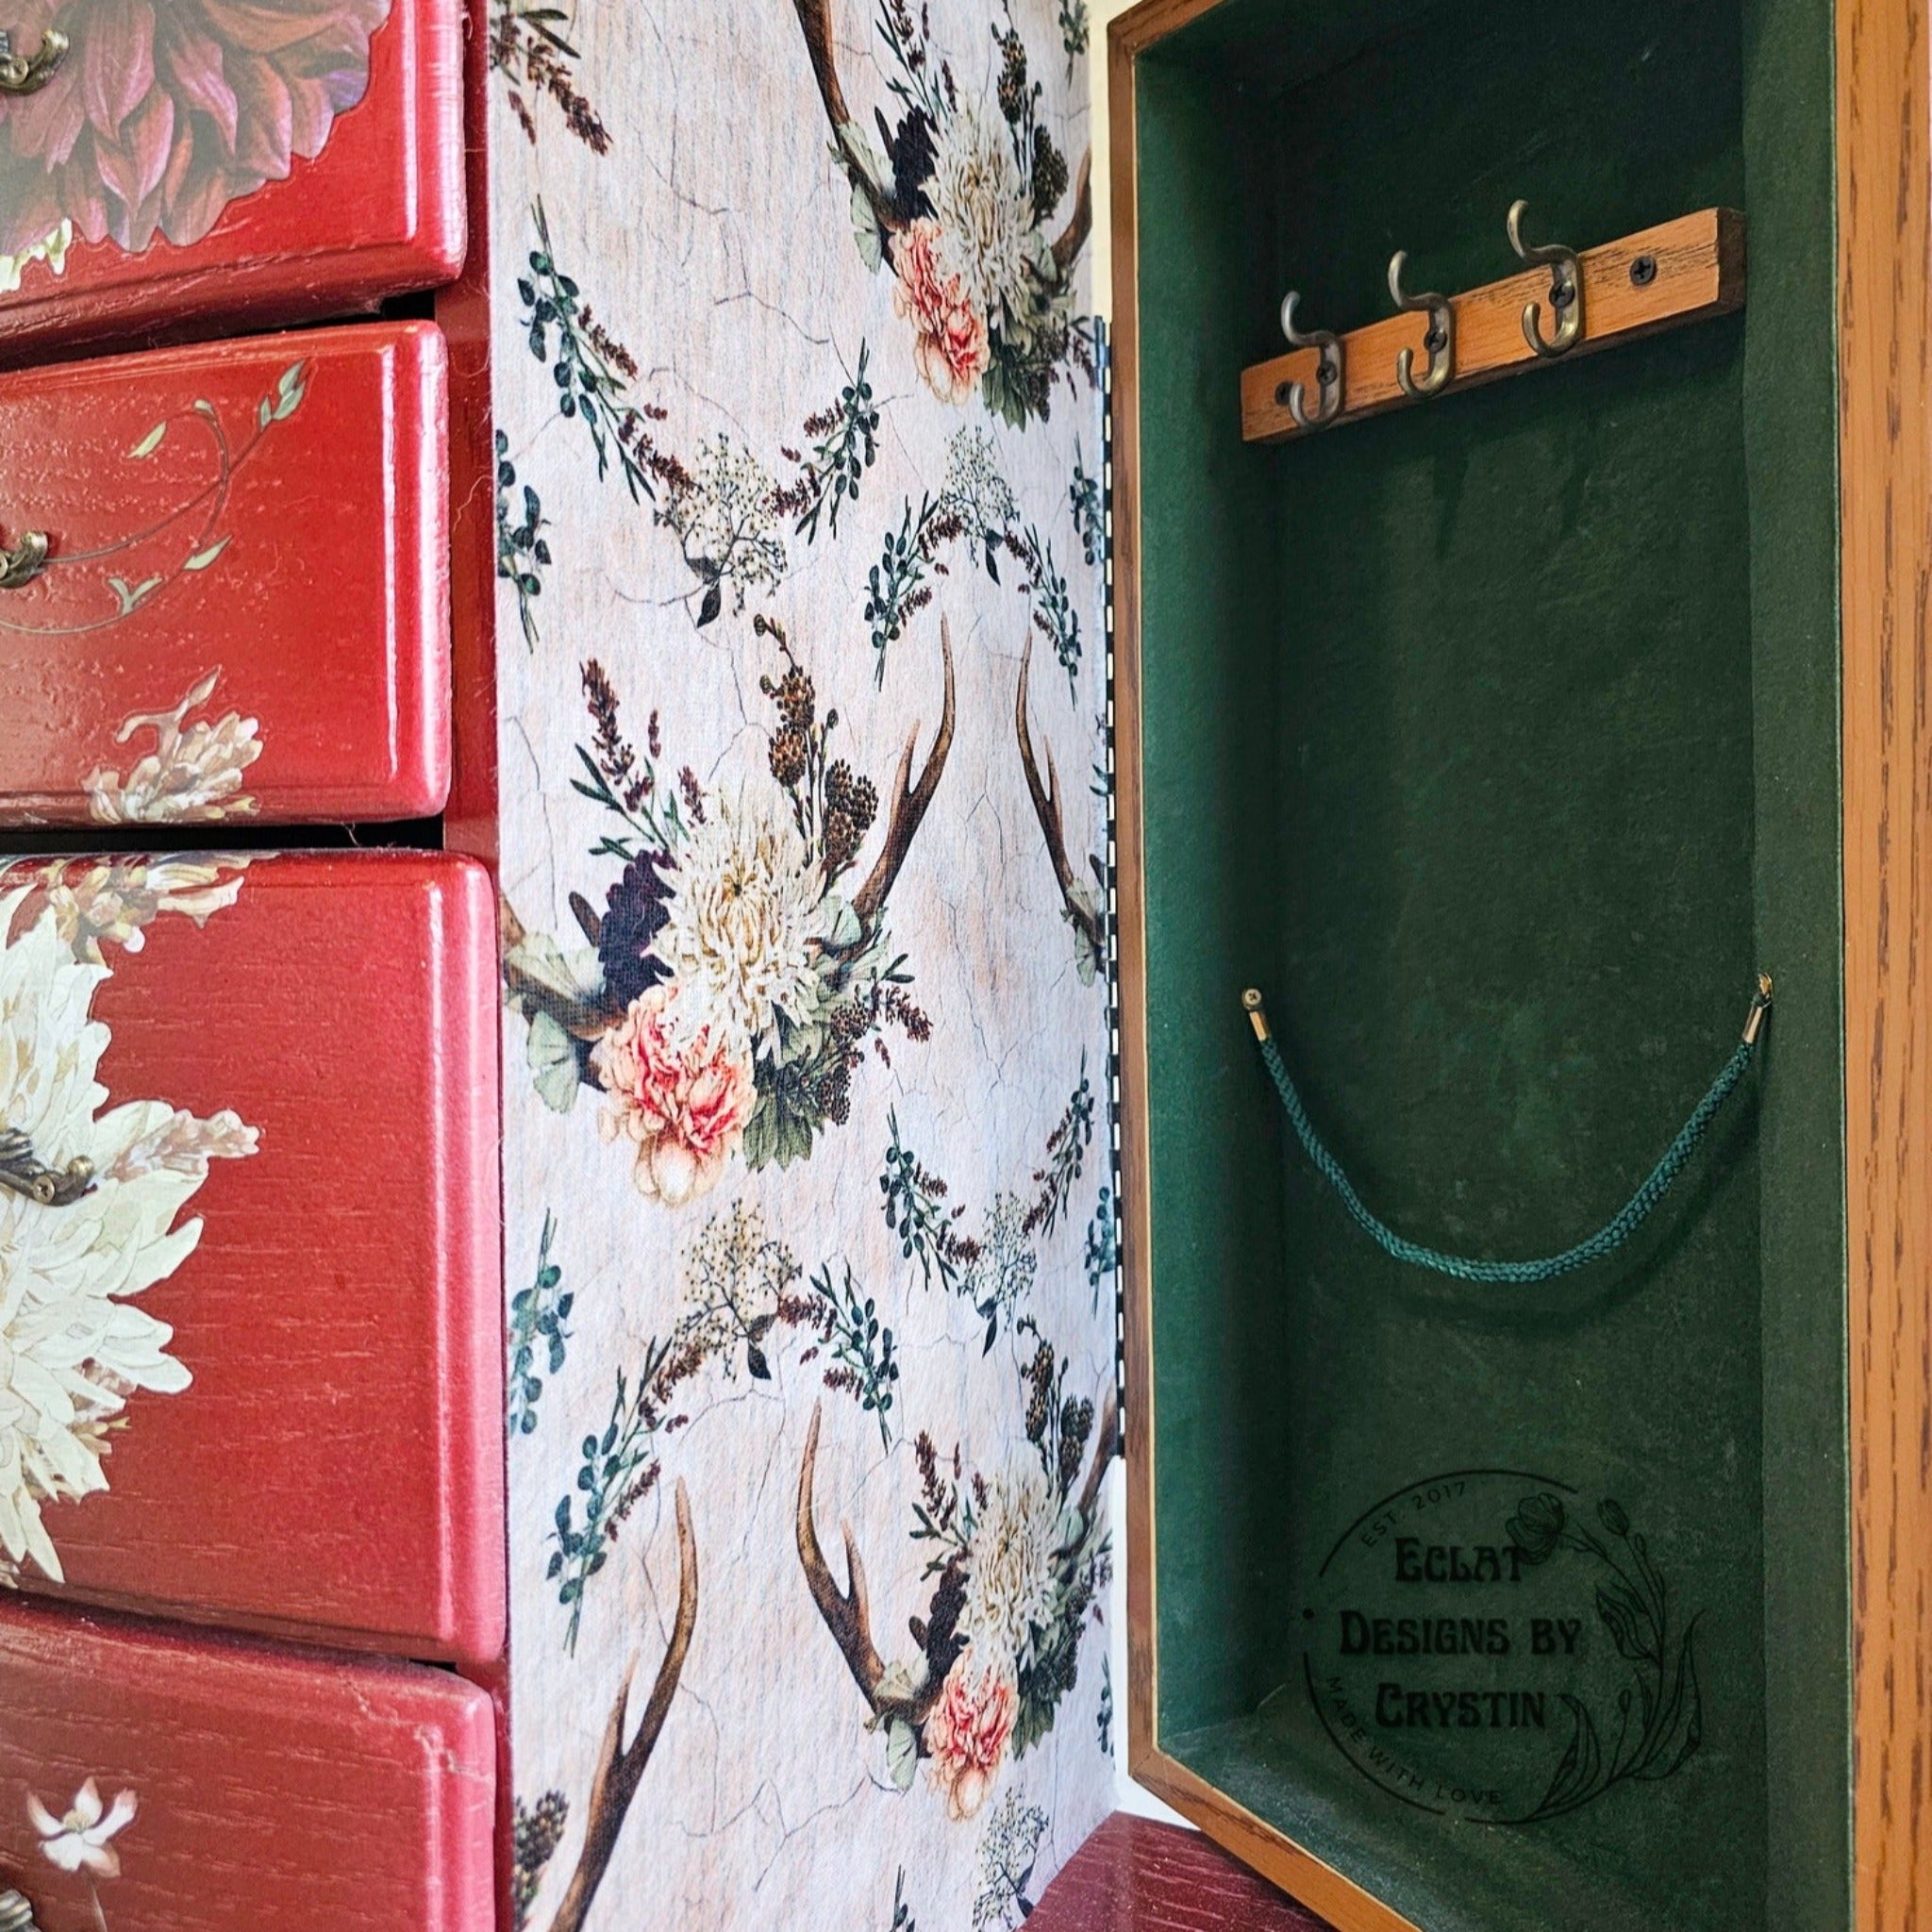 A close-up corner angle view of a vintage jewelry armoire refurbished by Eclat Designs by Crystin is painted red. The side door is open and shows green velvet inside the door and features ReDesign with Prima's Cedar Creek tissue paper on the side of the armoire.